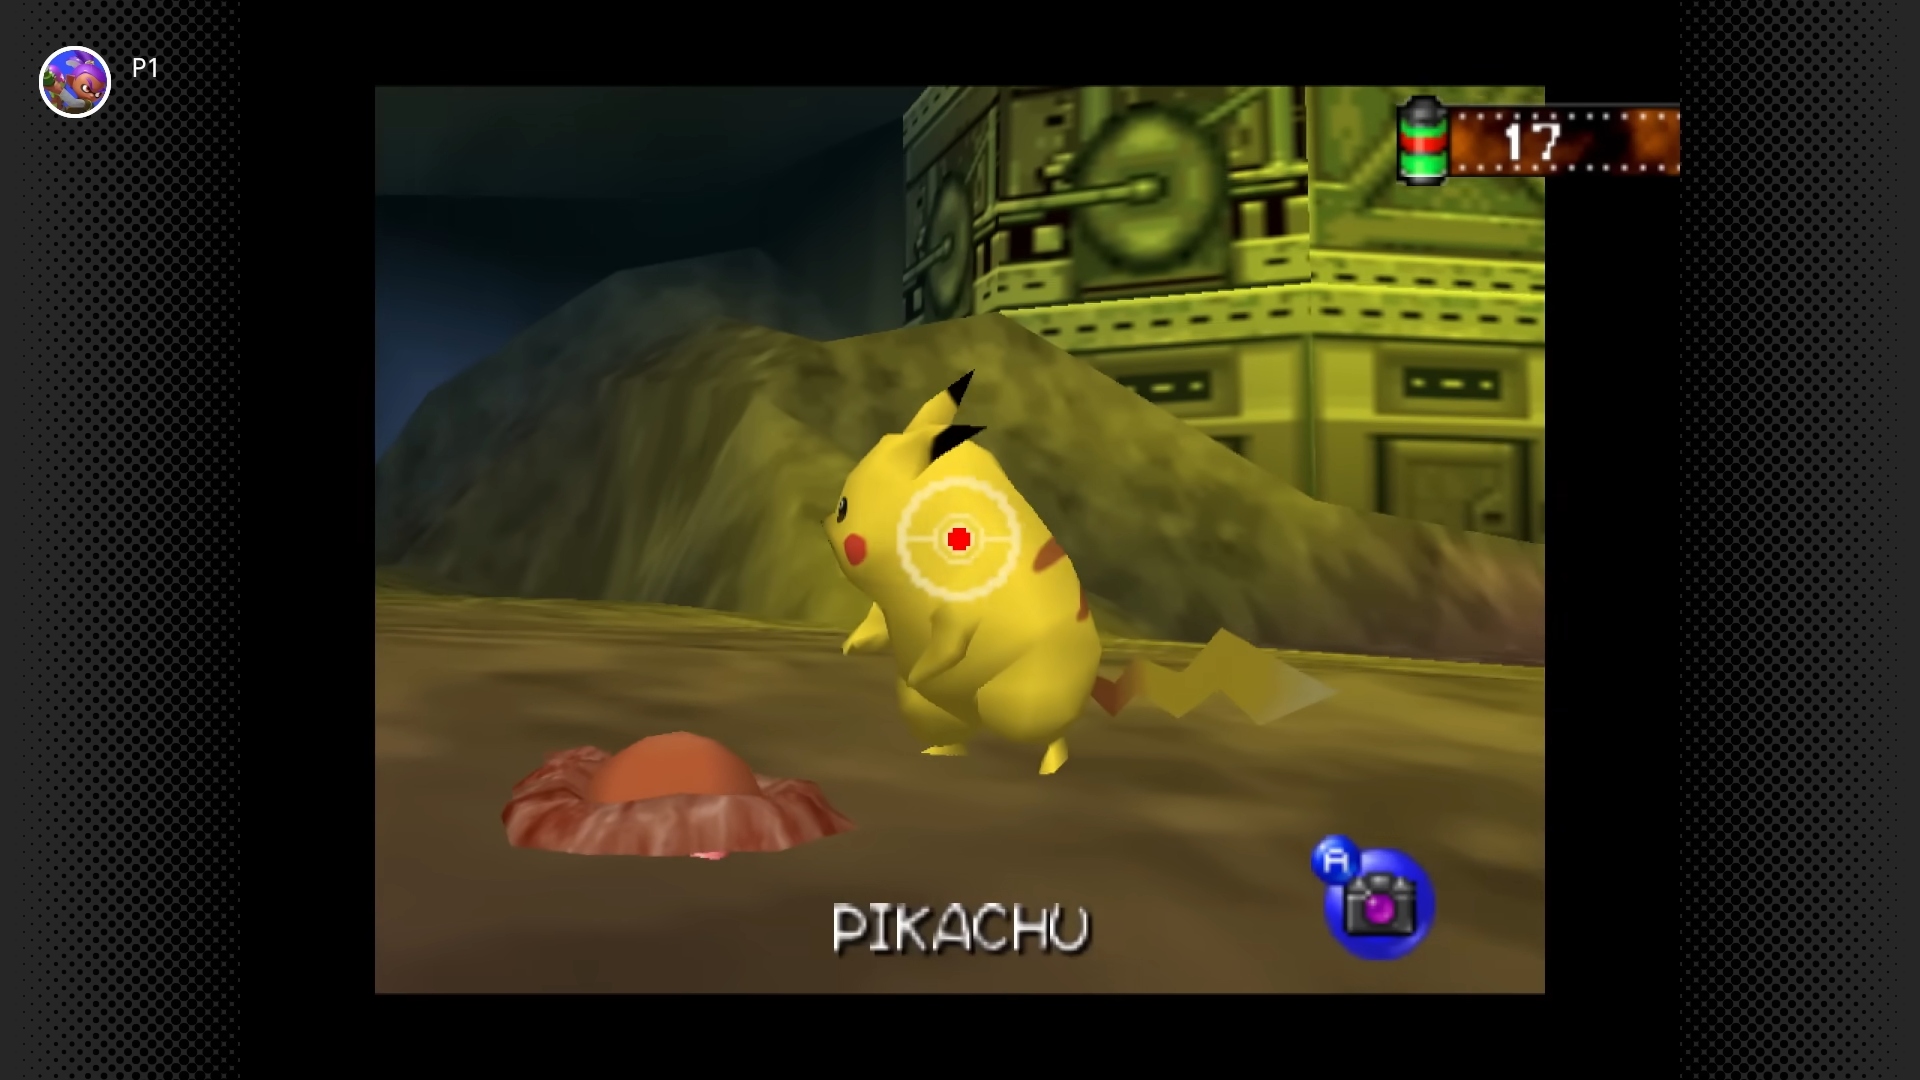 Pokémon Switch games: Pokémon Snap. Image shows Pikachu and Diglet in a cave, the Diglet is in a whole and Pikachu's name appears on-screen.